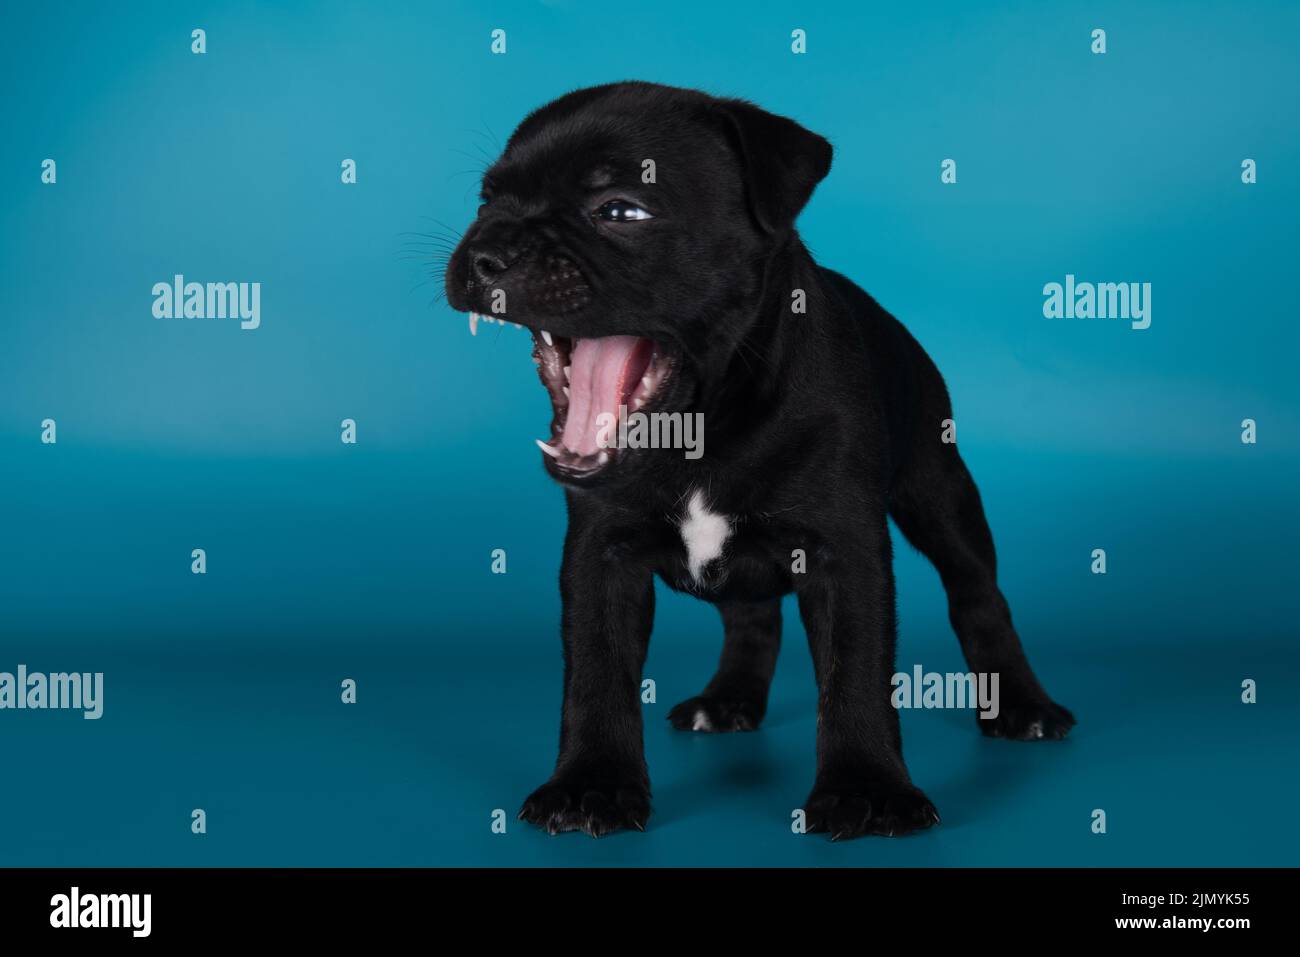 Black male American Staffordshire Terrier dog or AmStaff puppy on blue background Stock Photo